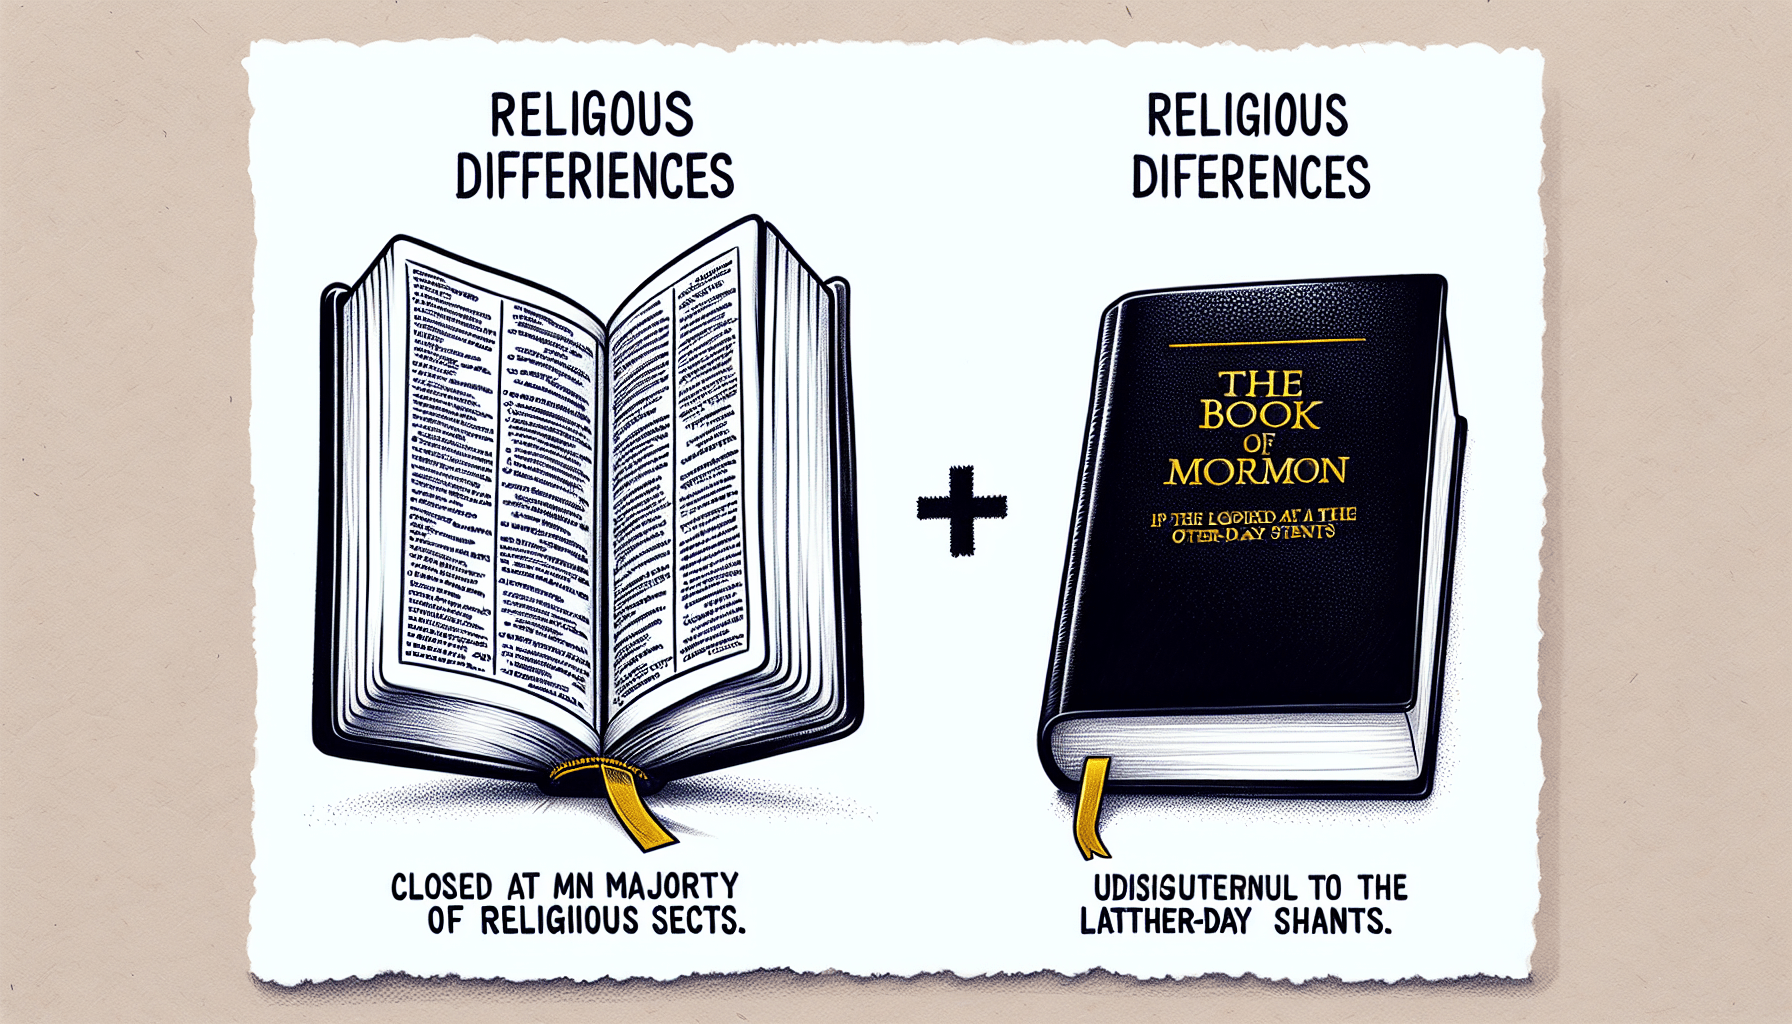 How Is Latter-day Saints Different From Other Religions?